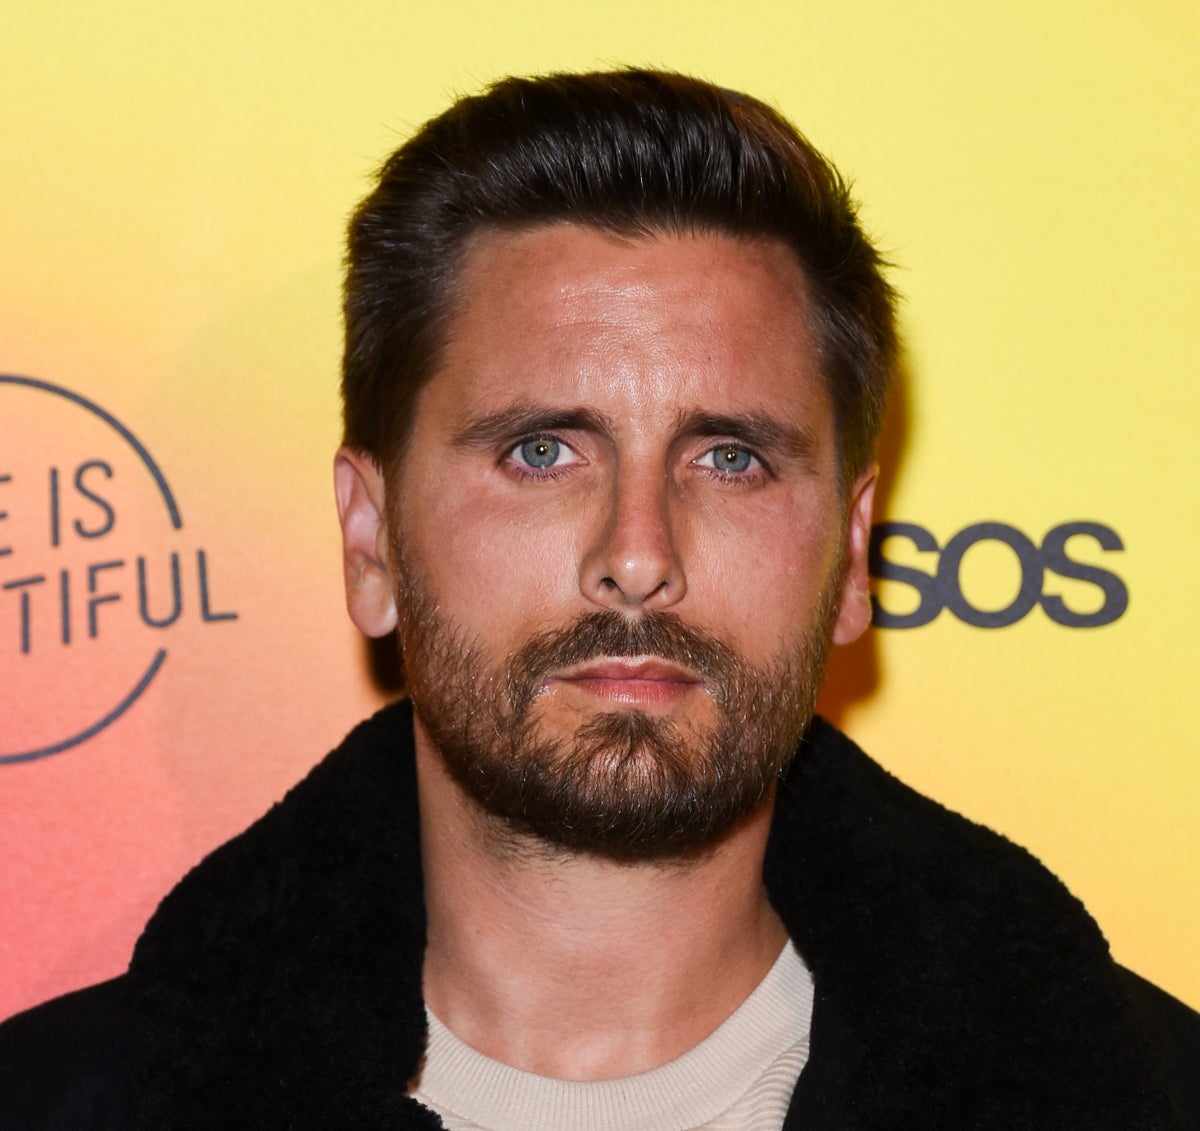 Fans criticise Scott Disick after he compares himself to Jesus